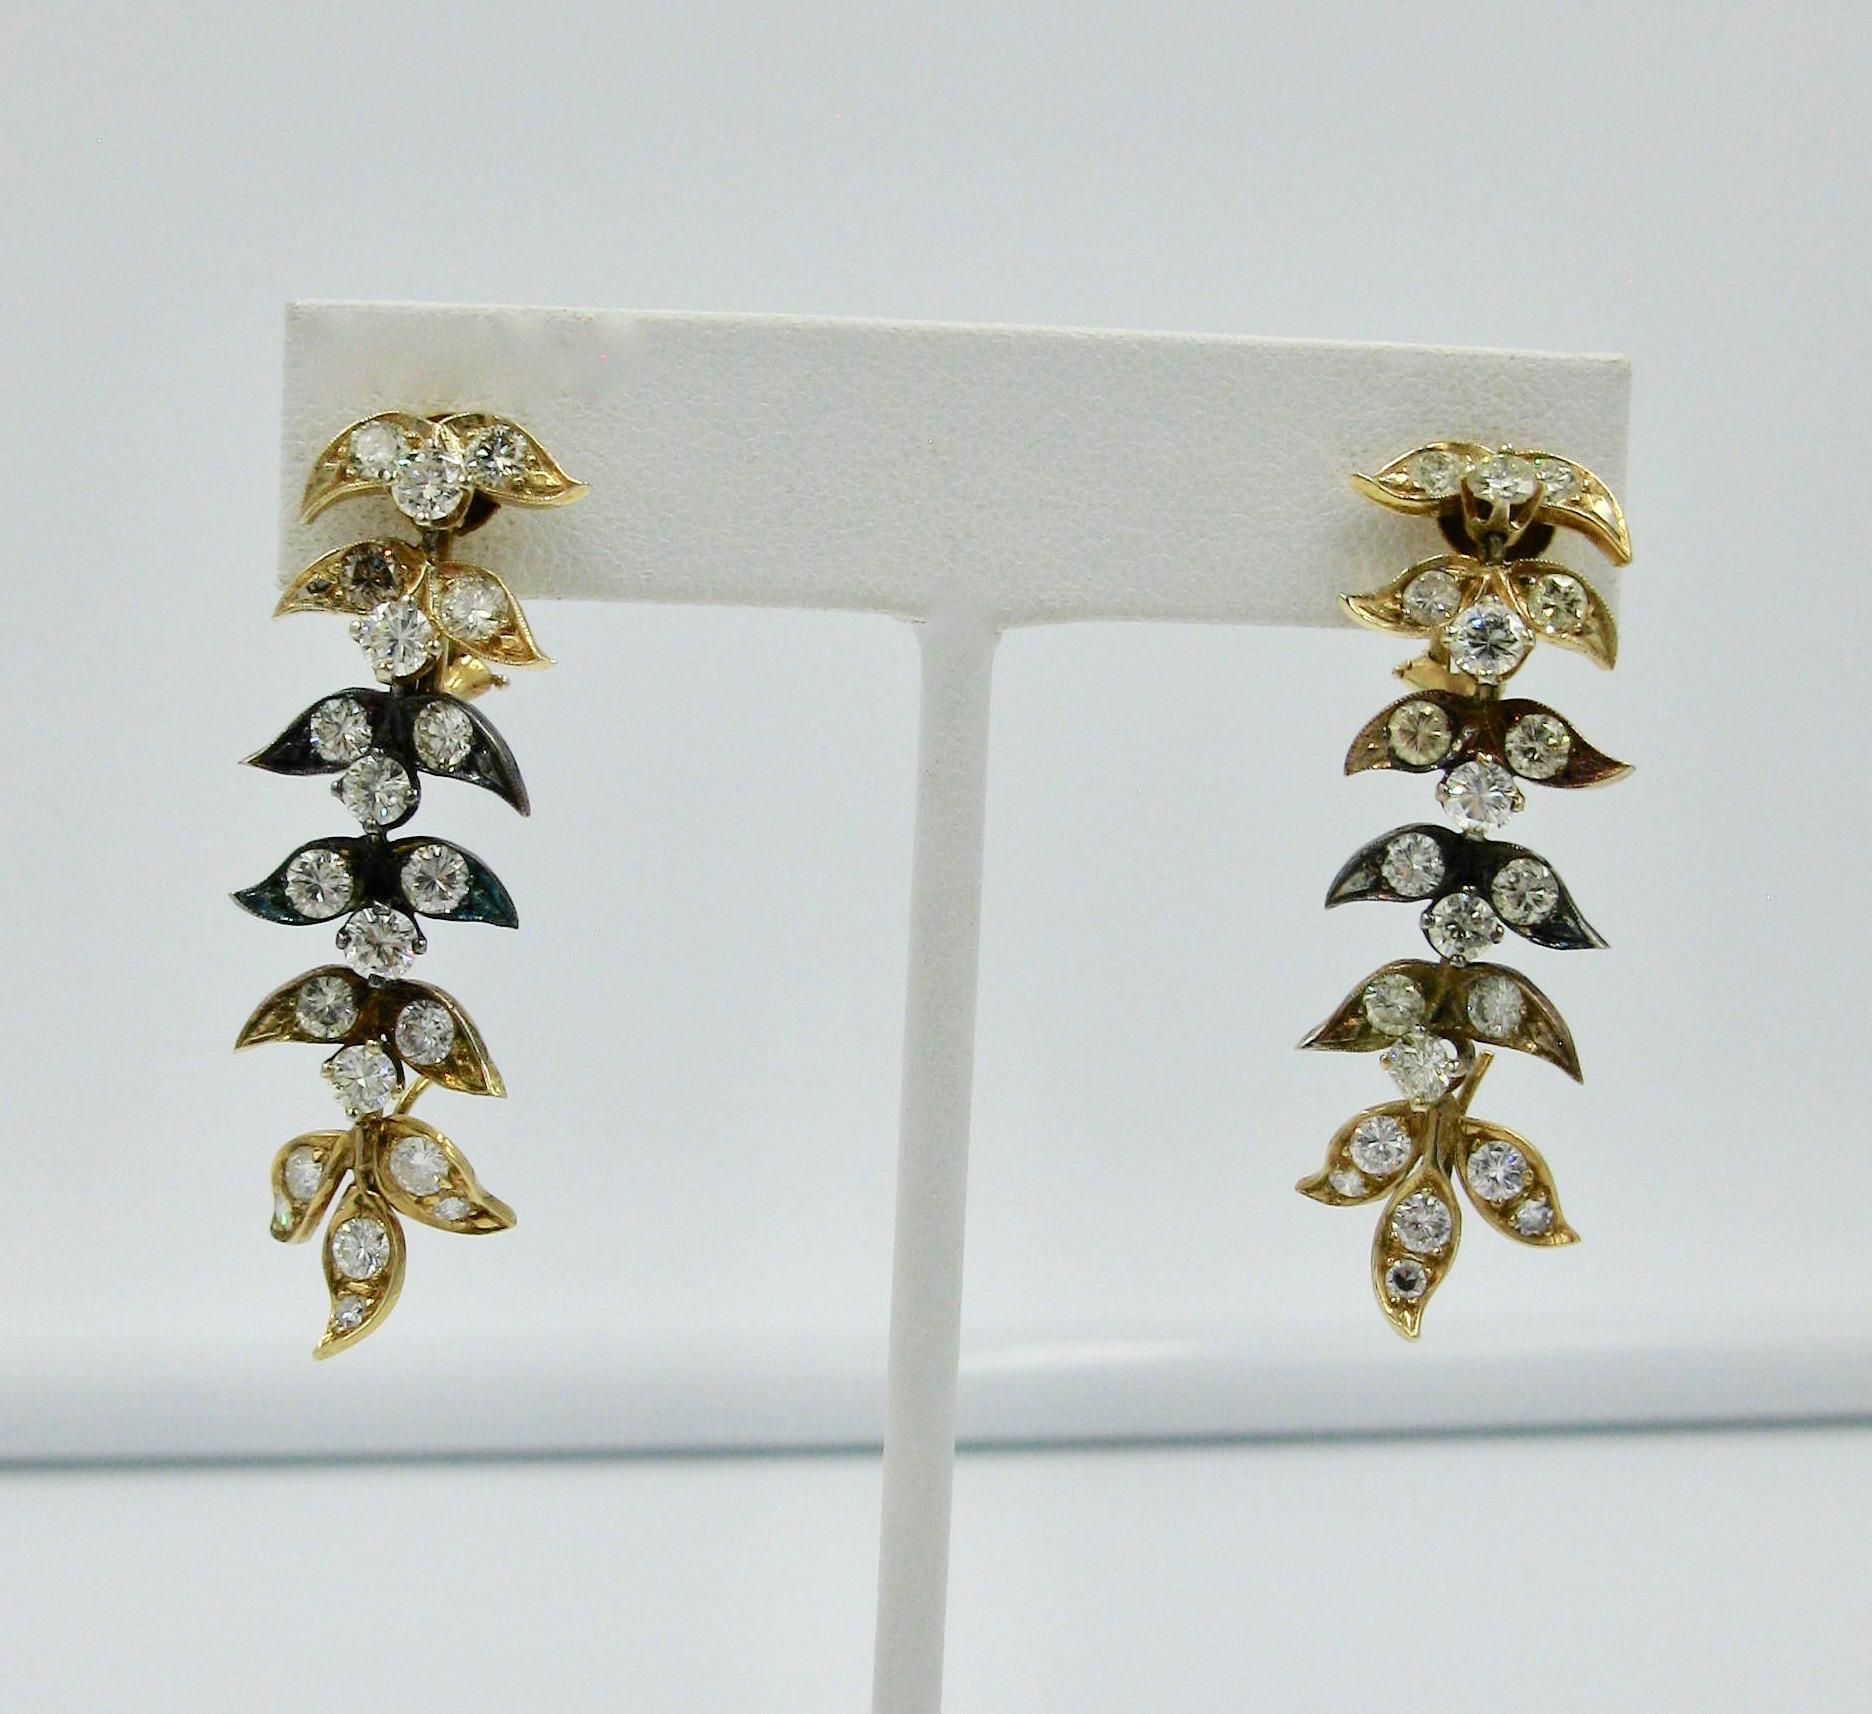 AN EXTRAORDINARY PAIR OF MID CENTURY MODERN DIAMOND EARRINGS WITH 4.55 CARATS OF SPECTACULAR SPARKLING YELLOW AND WHITE DIAMONDS OF SUPERB QUALITY
The cascading leaf form articulated pendant earrings are set with 42 Diamonds of VS clarity which